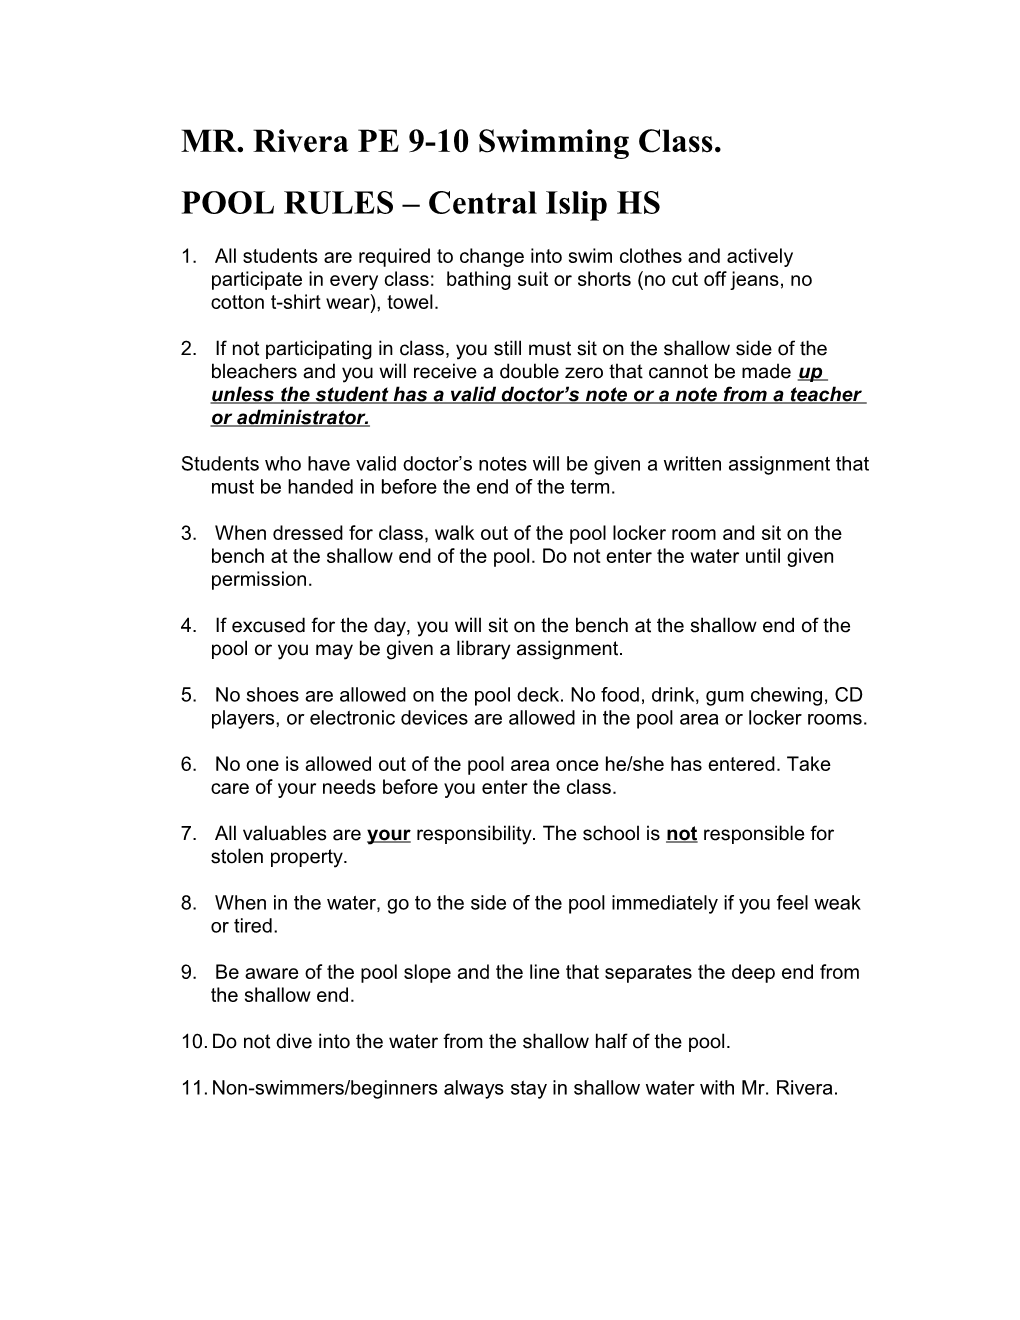 POOL RULES Central Islip HS